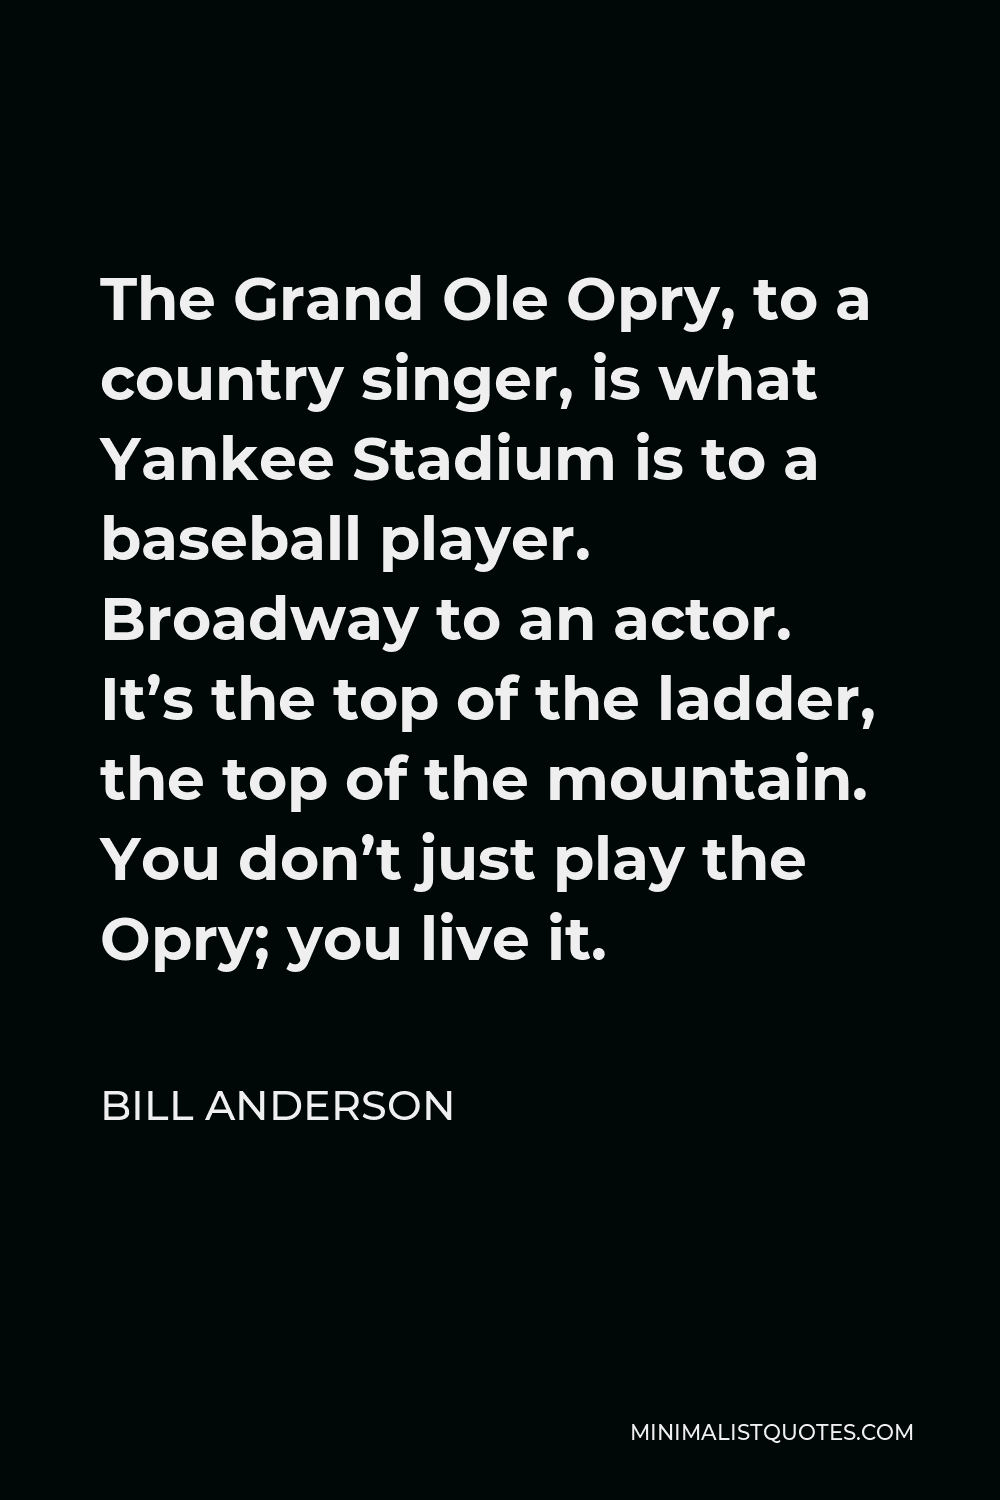 Bill Anderson Quote - The Grand Ole Opry, to a country singer, is what Yankee Stadium is to a baseball player. Broadway to an actor. It’s the top of the ladder, the top of the mountain. You don’t just play the Opry; you live it.